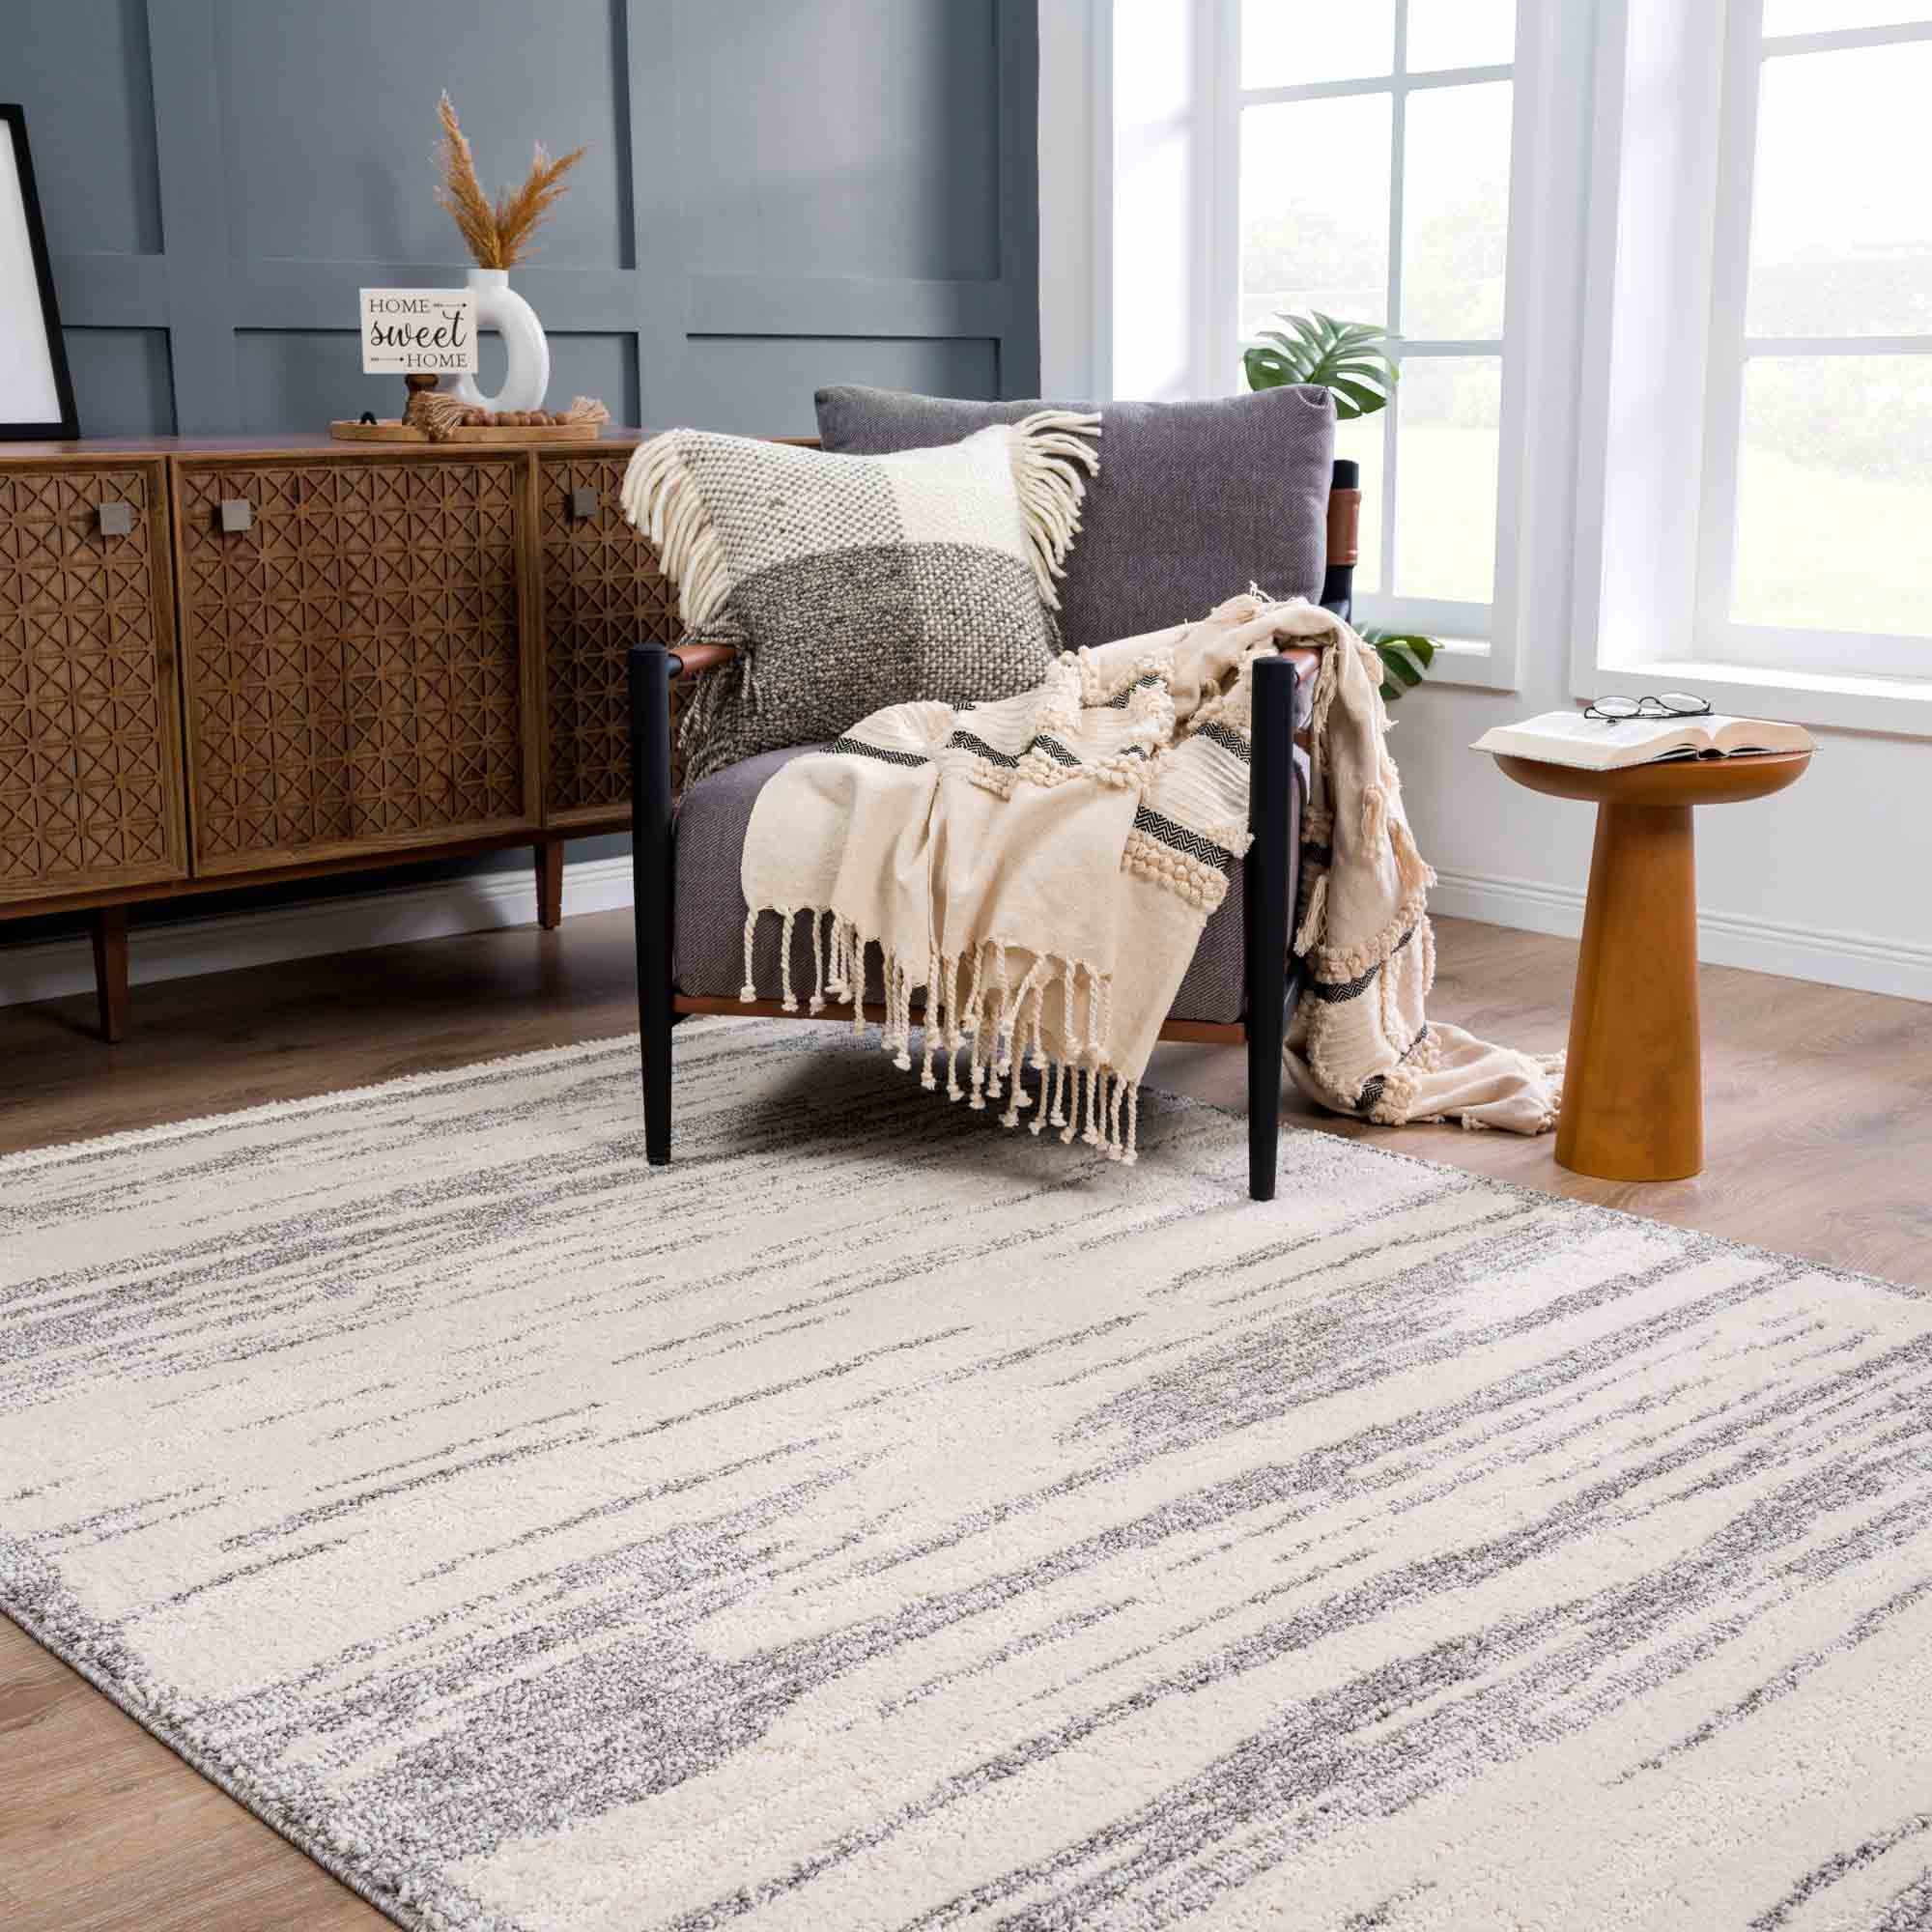 Sattley Modern Farmhouse Living Room Bedroom Dining Room Area Rug -  Transitional Bohemian Carpet - Non Shed, Stain Resistant - Beige, Grey,  Black